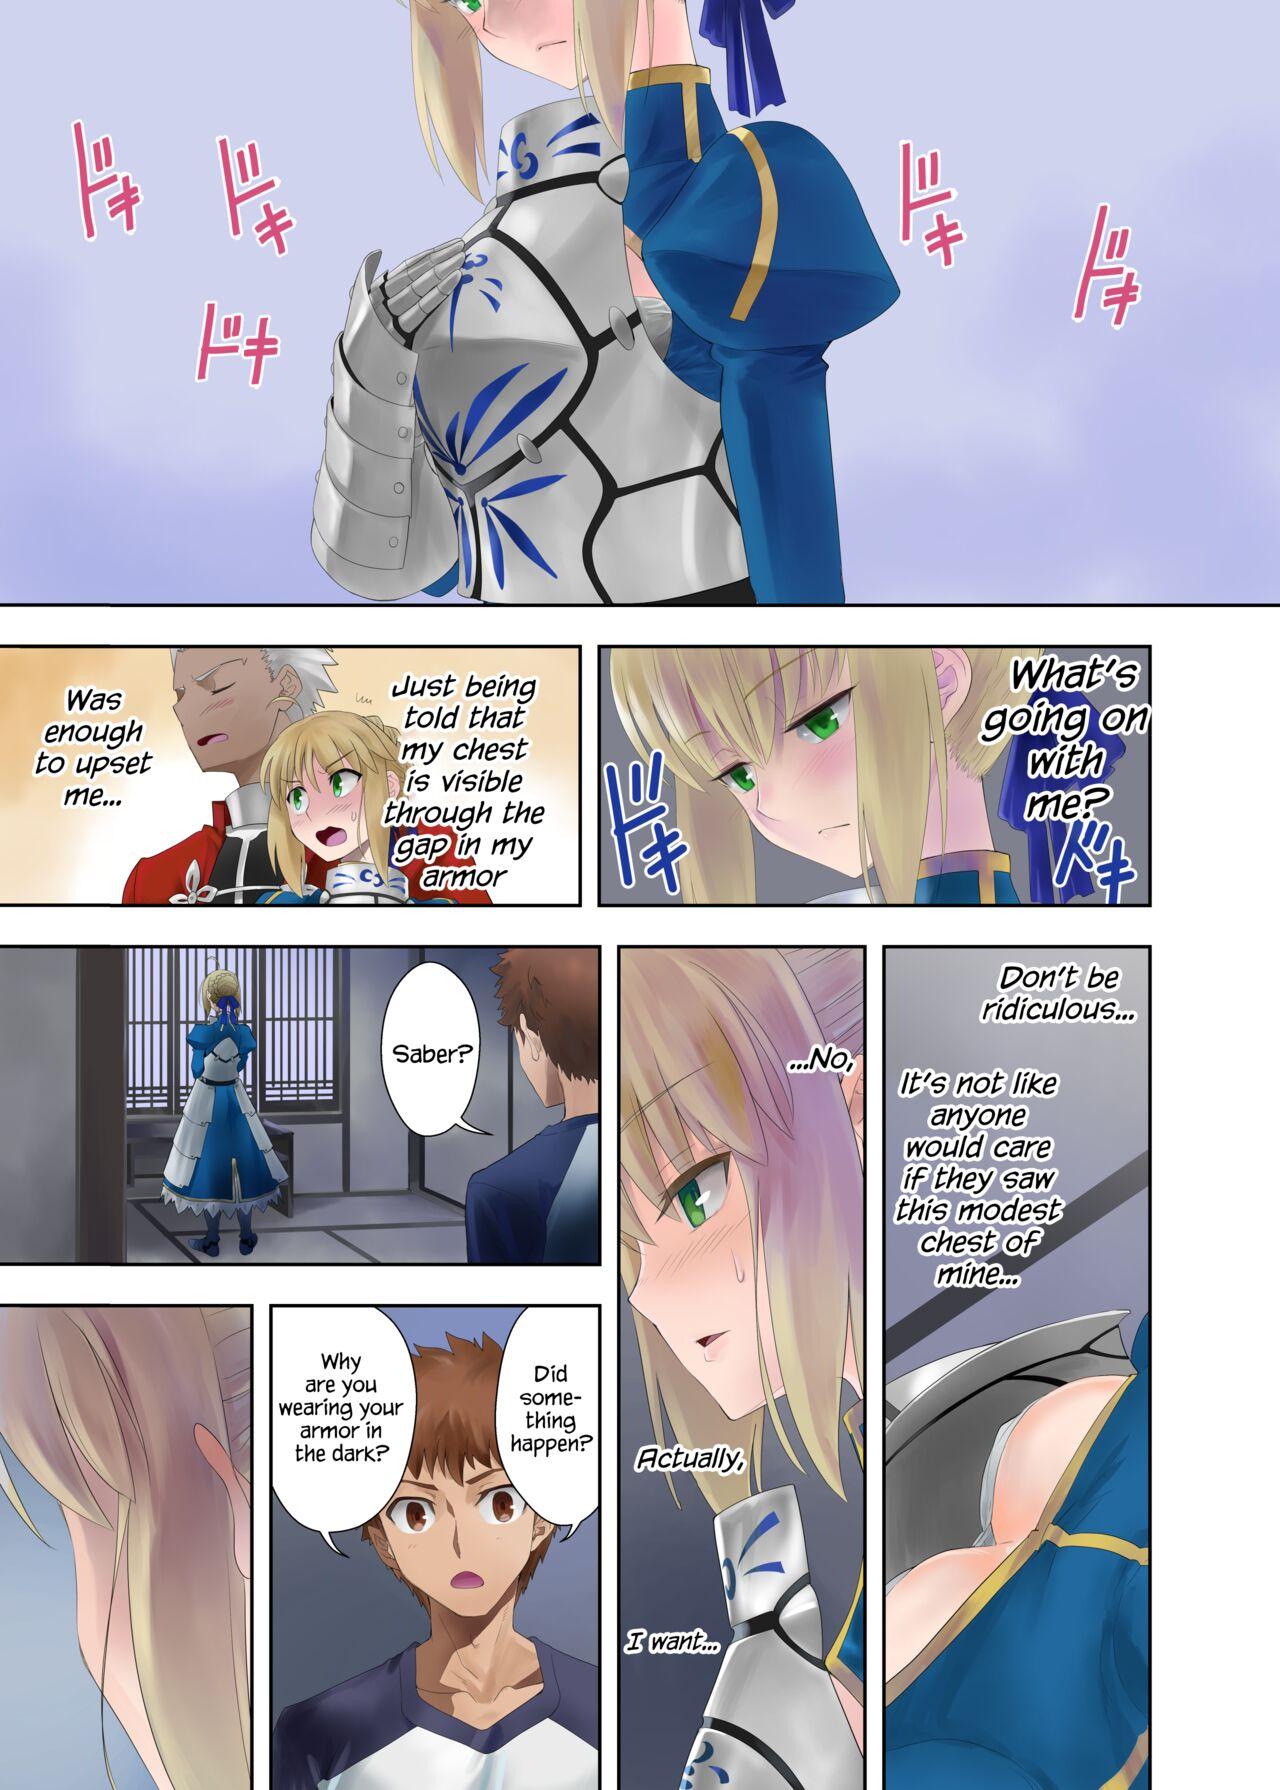 Submissive flowers - Fate stay night Footfetish - Page 2